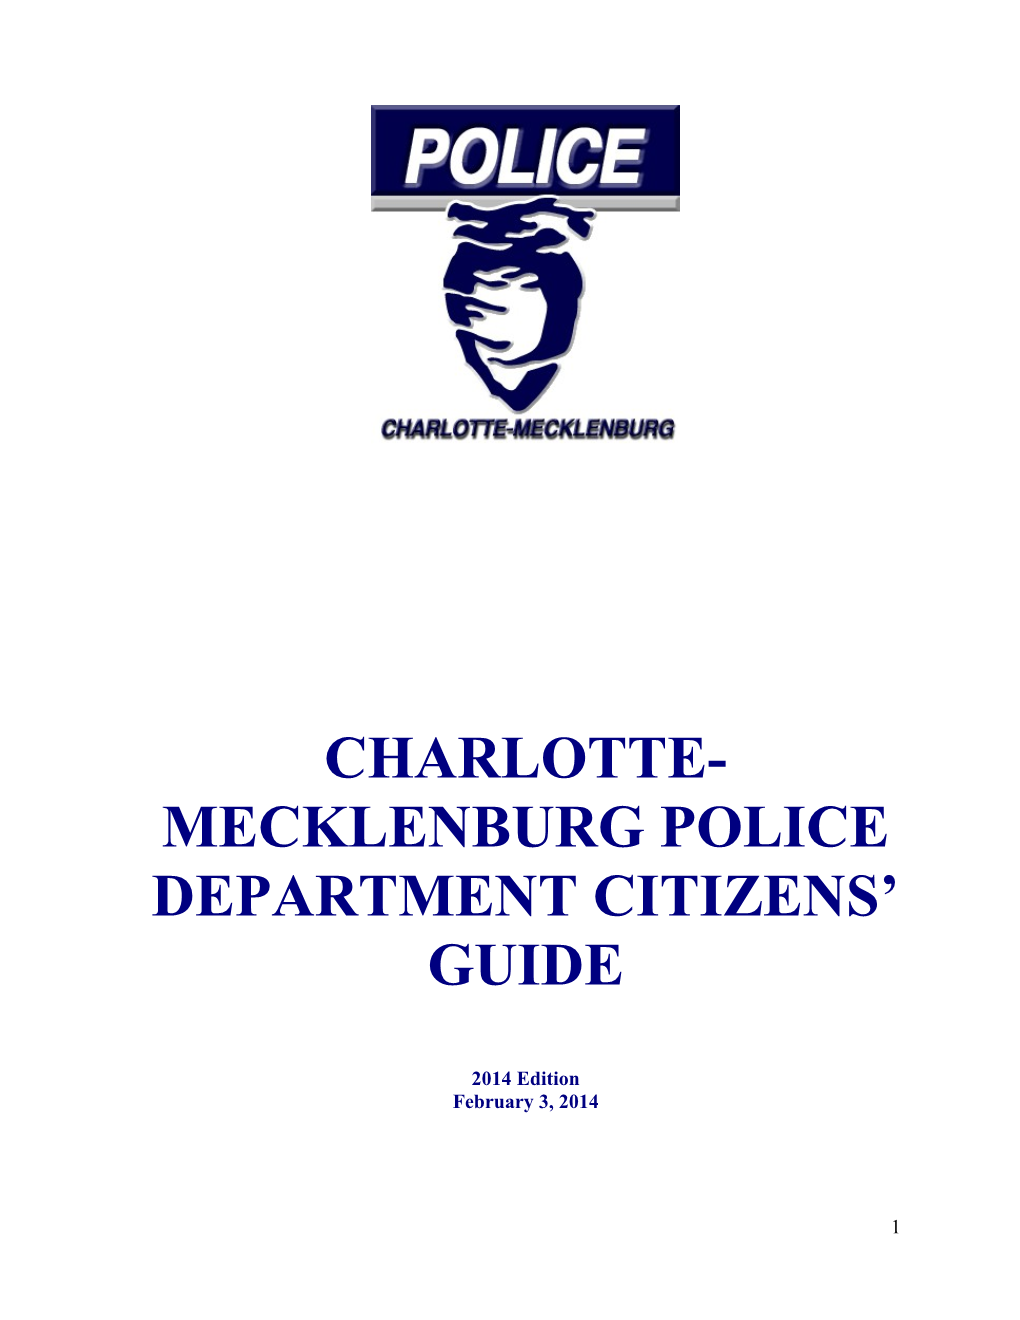 Charlotte-Mecklenburg Police Department Citizens’ Guide